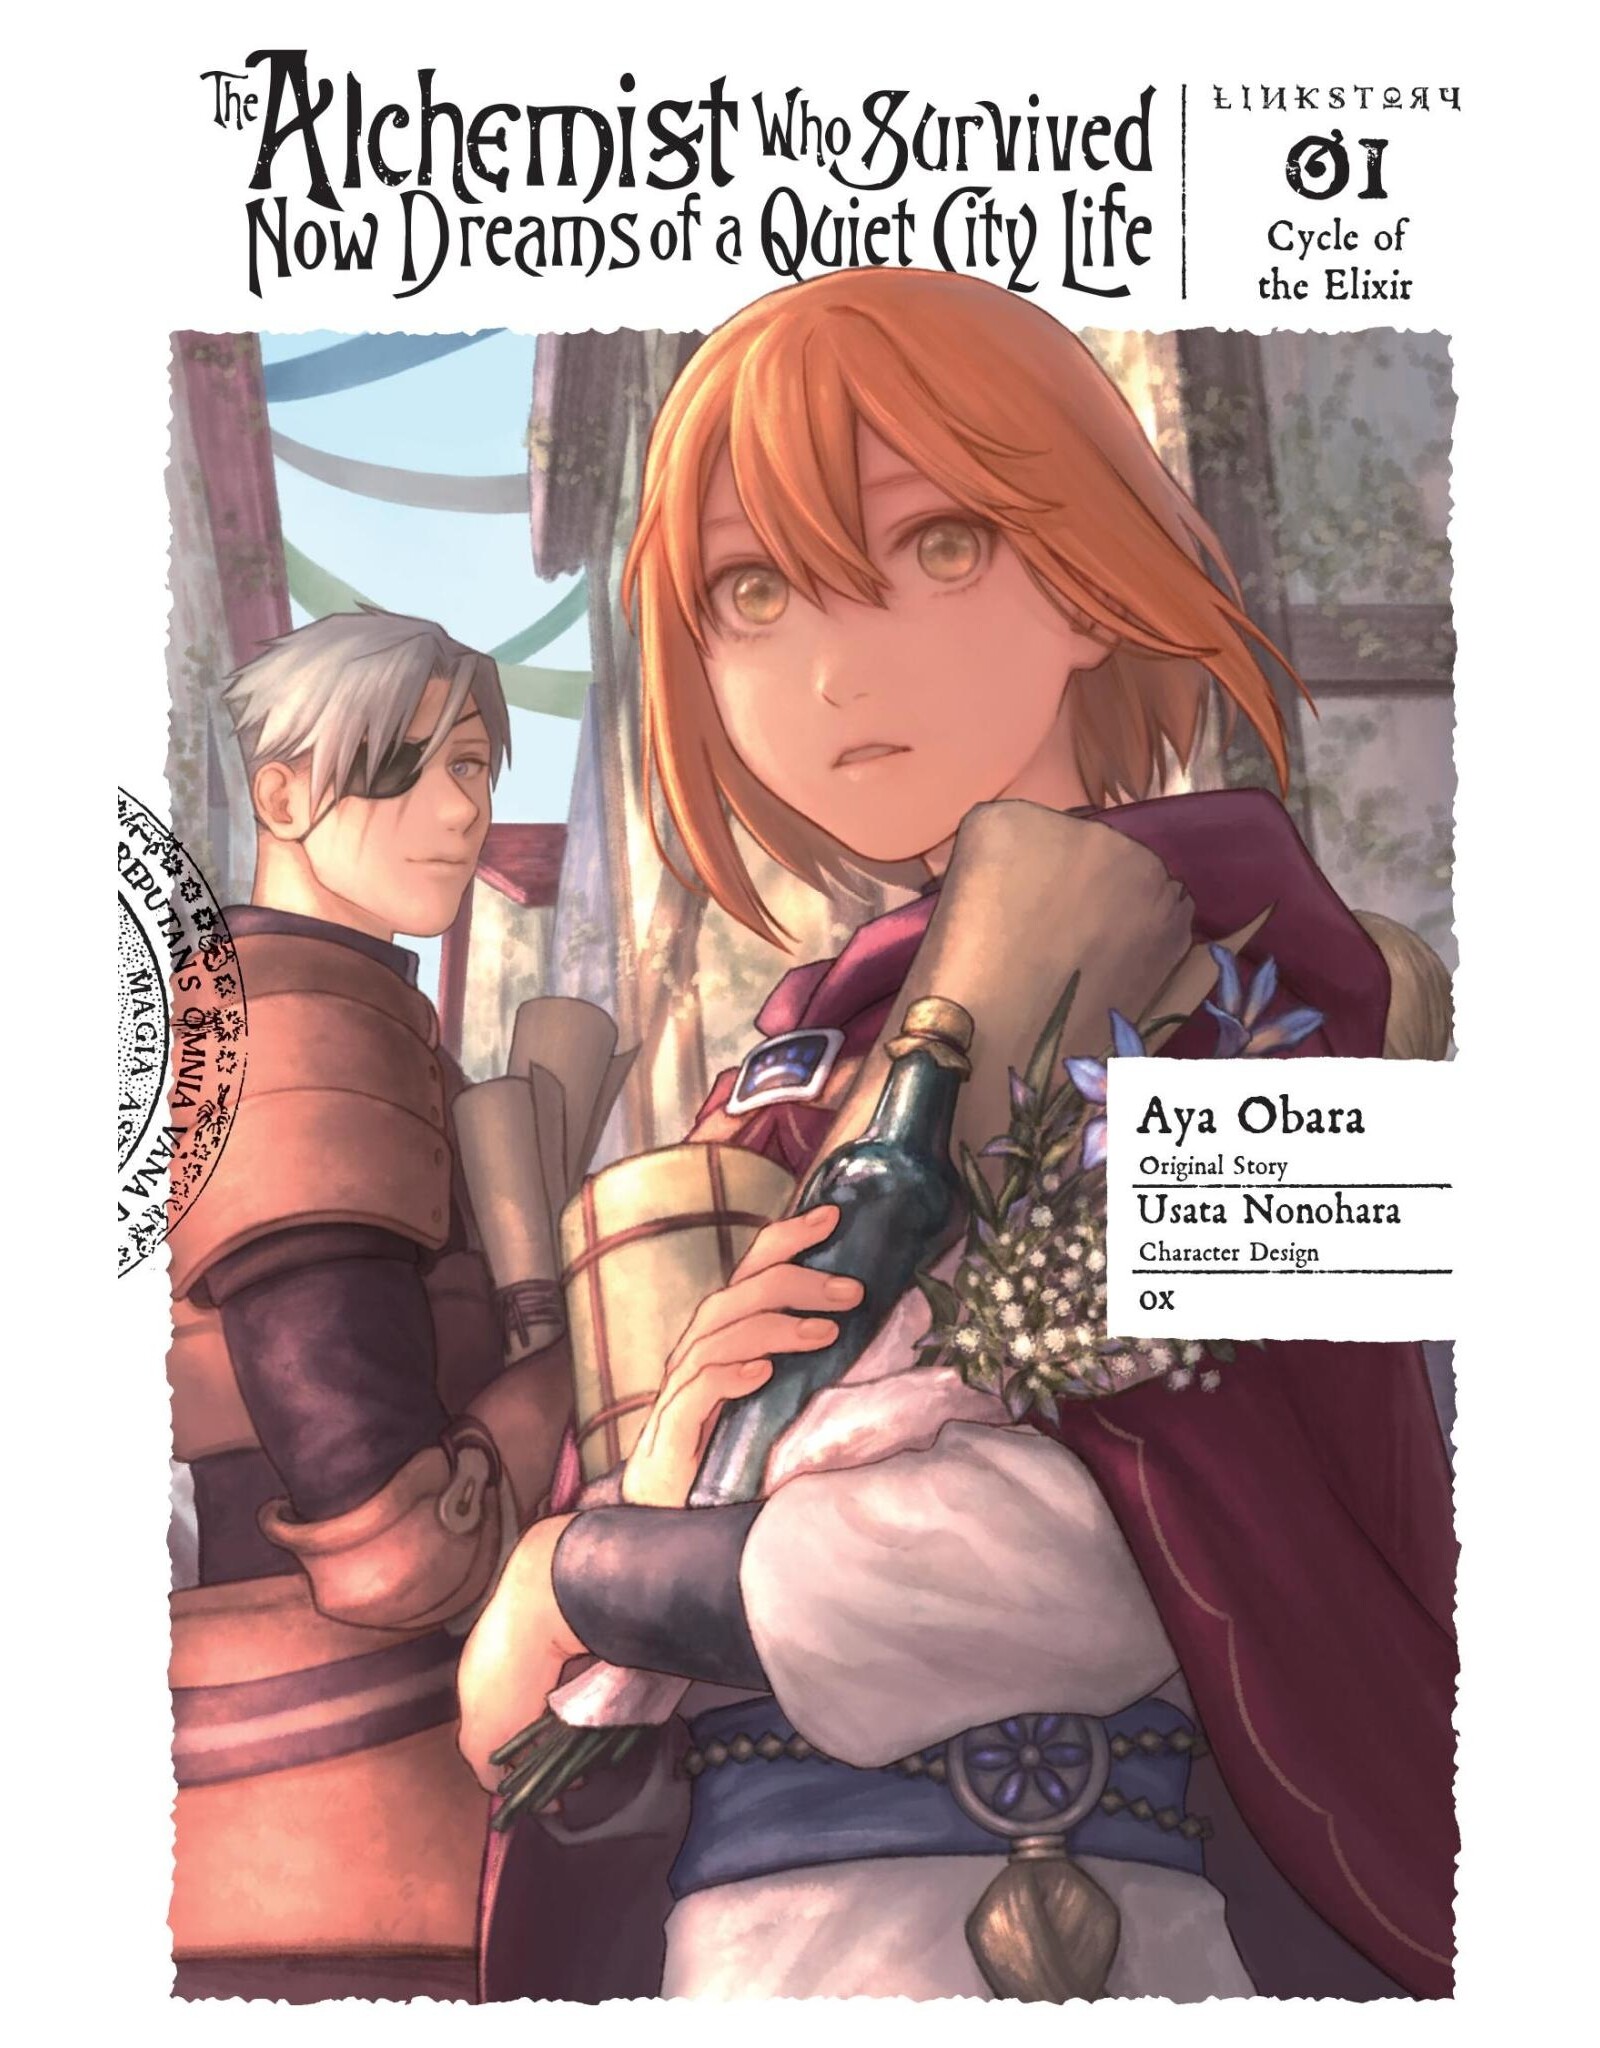 The Alchemist Who Survived Now Dreams of a Quiet City Life 01 (English) - Manga